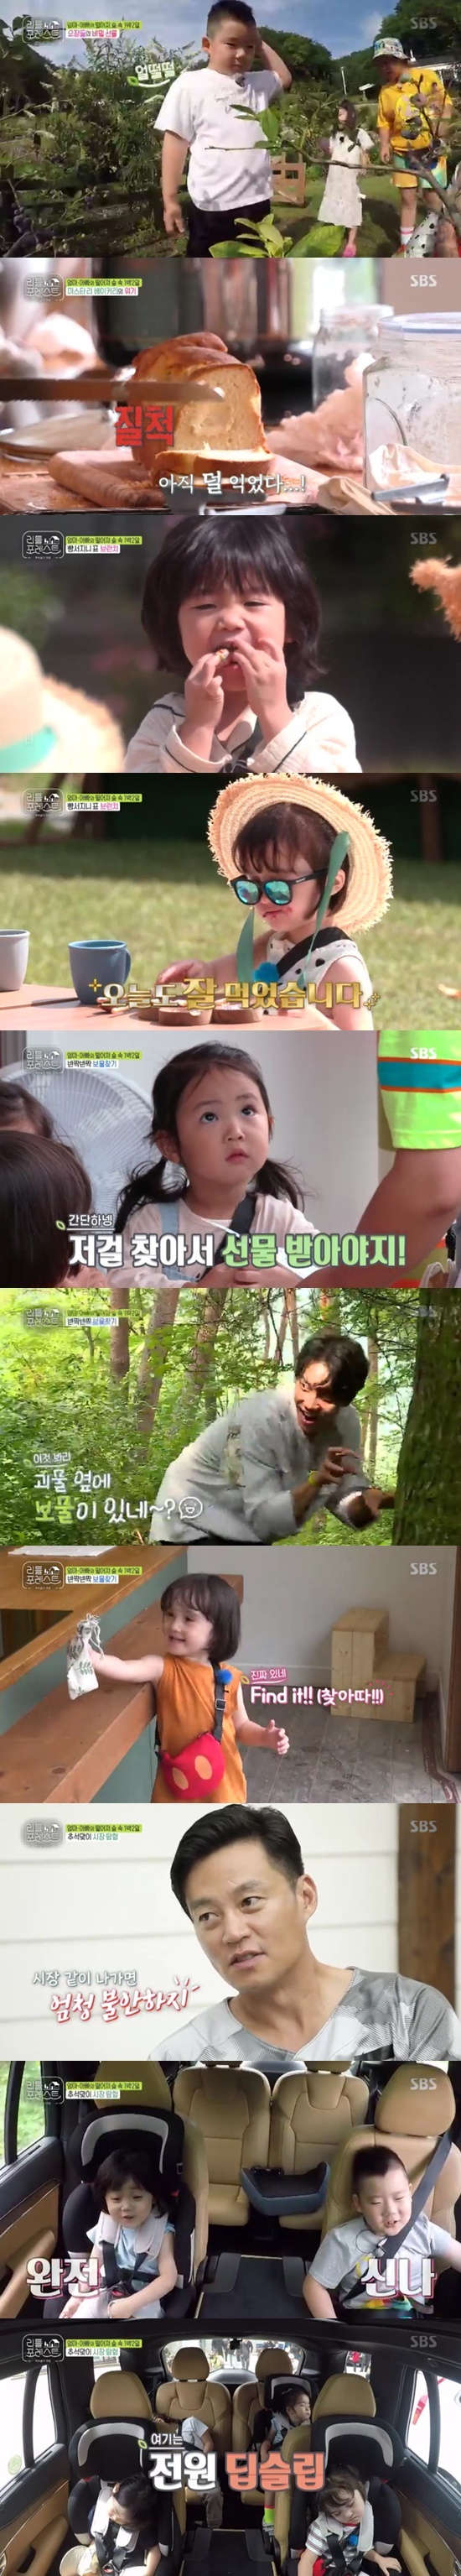 Seoul = = Little Forest Lee Seung-gi was embarrassed by the day of the shooting that did not go as planned.On SBS Monday, which was broadcasted at 10 pm on the 16th, a new morning with Little People started in the Little Forest program.Lee Seo-jin made bread dough at night to give children bread, and started making bread using fermented bread dough from morning.The children headed to the field to watch the blueberry trees planted overnight by Park Na-rae and Jung So-min.The children believed that there was a blueberry fairy in a large blueberry tree that suddenly appeared, and thanked each of them for the blueberry fairy.The children joined together for the blueberry jam to eat with bread, and crushed the blueberry; Brooke did not stop eating the blueberry, saying, I keep going into my mouth.Park Na-rae and Lee Seo-jin made a raspy laugh on Brooks face, which became a blueberry bump.Lee Seo-jin had a hard time baking bread - the middle part of the bread was not ripe.Eventually, after the third attempt, the bread was completed, but the middle part was still wet and became the adults responsibility. Lee Seo-jin prepared only the ripe part for the children.After eating, the children had time to find Treasure.The children were delighted to shout the Gift they wanted to have, such as dolls, toys, rabbits, eggs, etc., when they said they would give Gift when they found Treasure.The children went to Treasure to have a Gift.Lee Seung-gi and Jung So-min helped Brooke and Eugene, who could not easily find Treasure.Lee Seung-gi transformed into a monster and told the location of Treasure, but the children focused on Lee Seung-gi and could not find Treasure even in front of their eyes, making everyone laugh.The children flocked to Lee Seo-jin to find the last Treasure.Hiding the last Treasure: Lee Seo-jin informed Brooke to find the last Treasure.After the Treasure search, Little Lee and the members went on a market tour to celebrate Chuseok; Lee Seo-jin was anxious about taking children to the market.The fact that they were out of the house made them sing in the car and bemused, but as soon as they arrived at the market, they all fell asleep and embarrassed the members.Lee Seung-gi said that there is nothing to be done as planned and said, The hit rate is 3.6%.